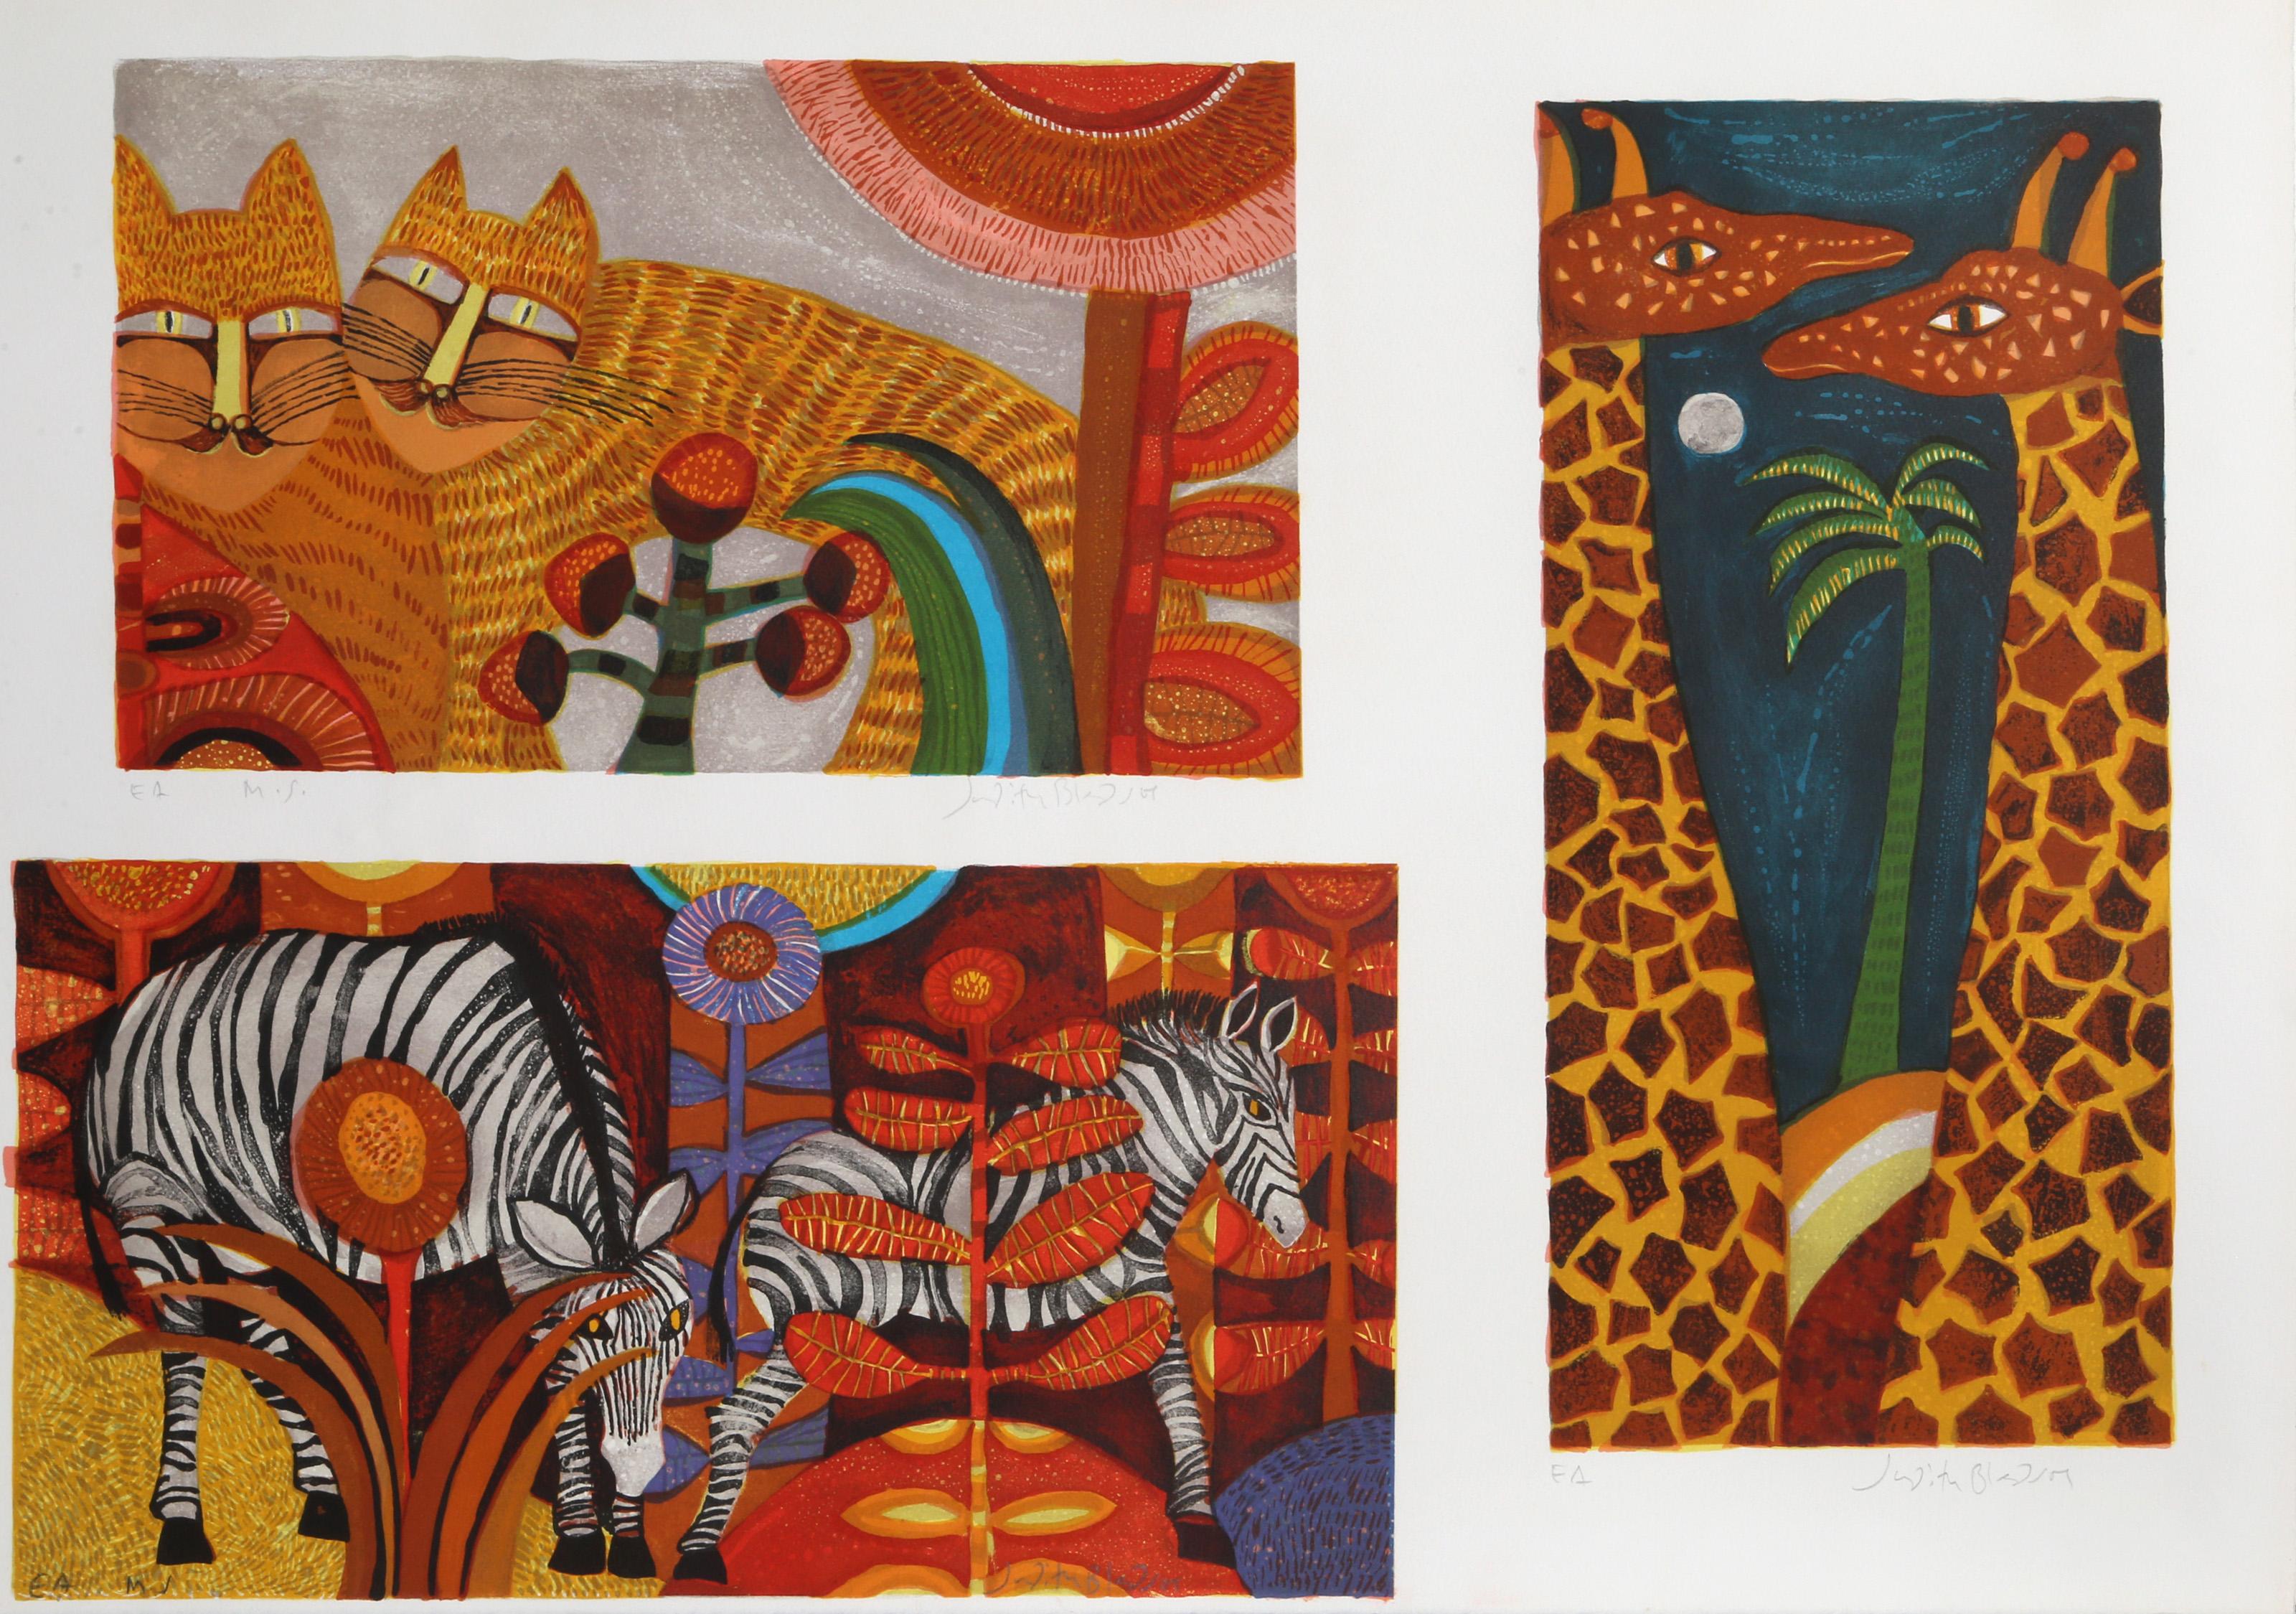 Judith Bledsoe, American (1938 - 2013) -  Cats, Giraffes and Zebras. Year: circa 1980, Medium: Lithograph and Blind Embossing, signed and dedicated in pencil, Edition: EA, Size: 21  x 29.5 in. (53.34  x 74.93 cm), Description: In this triple-paned